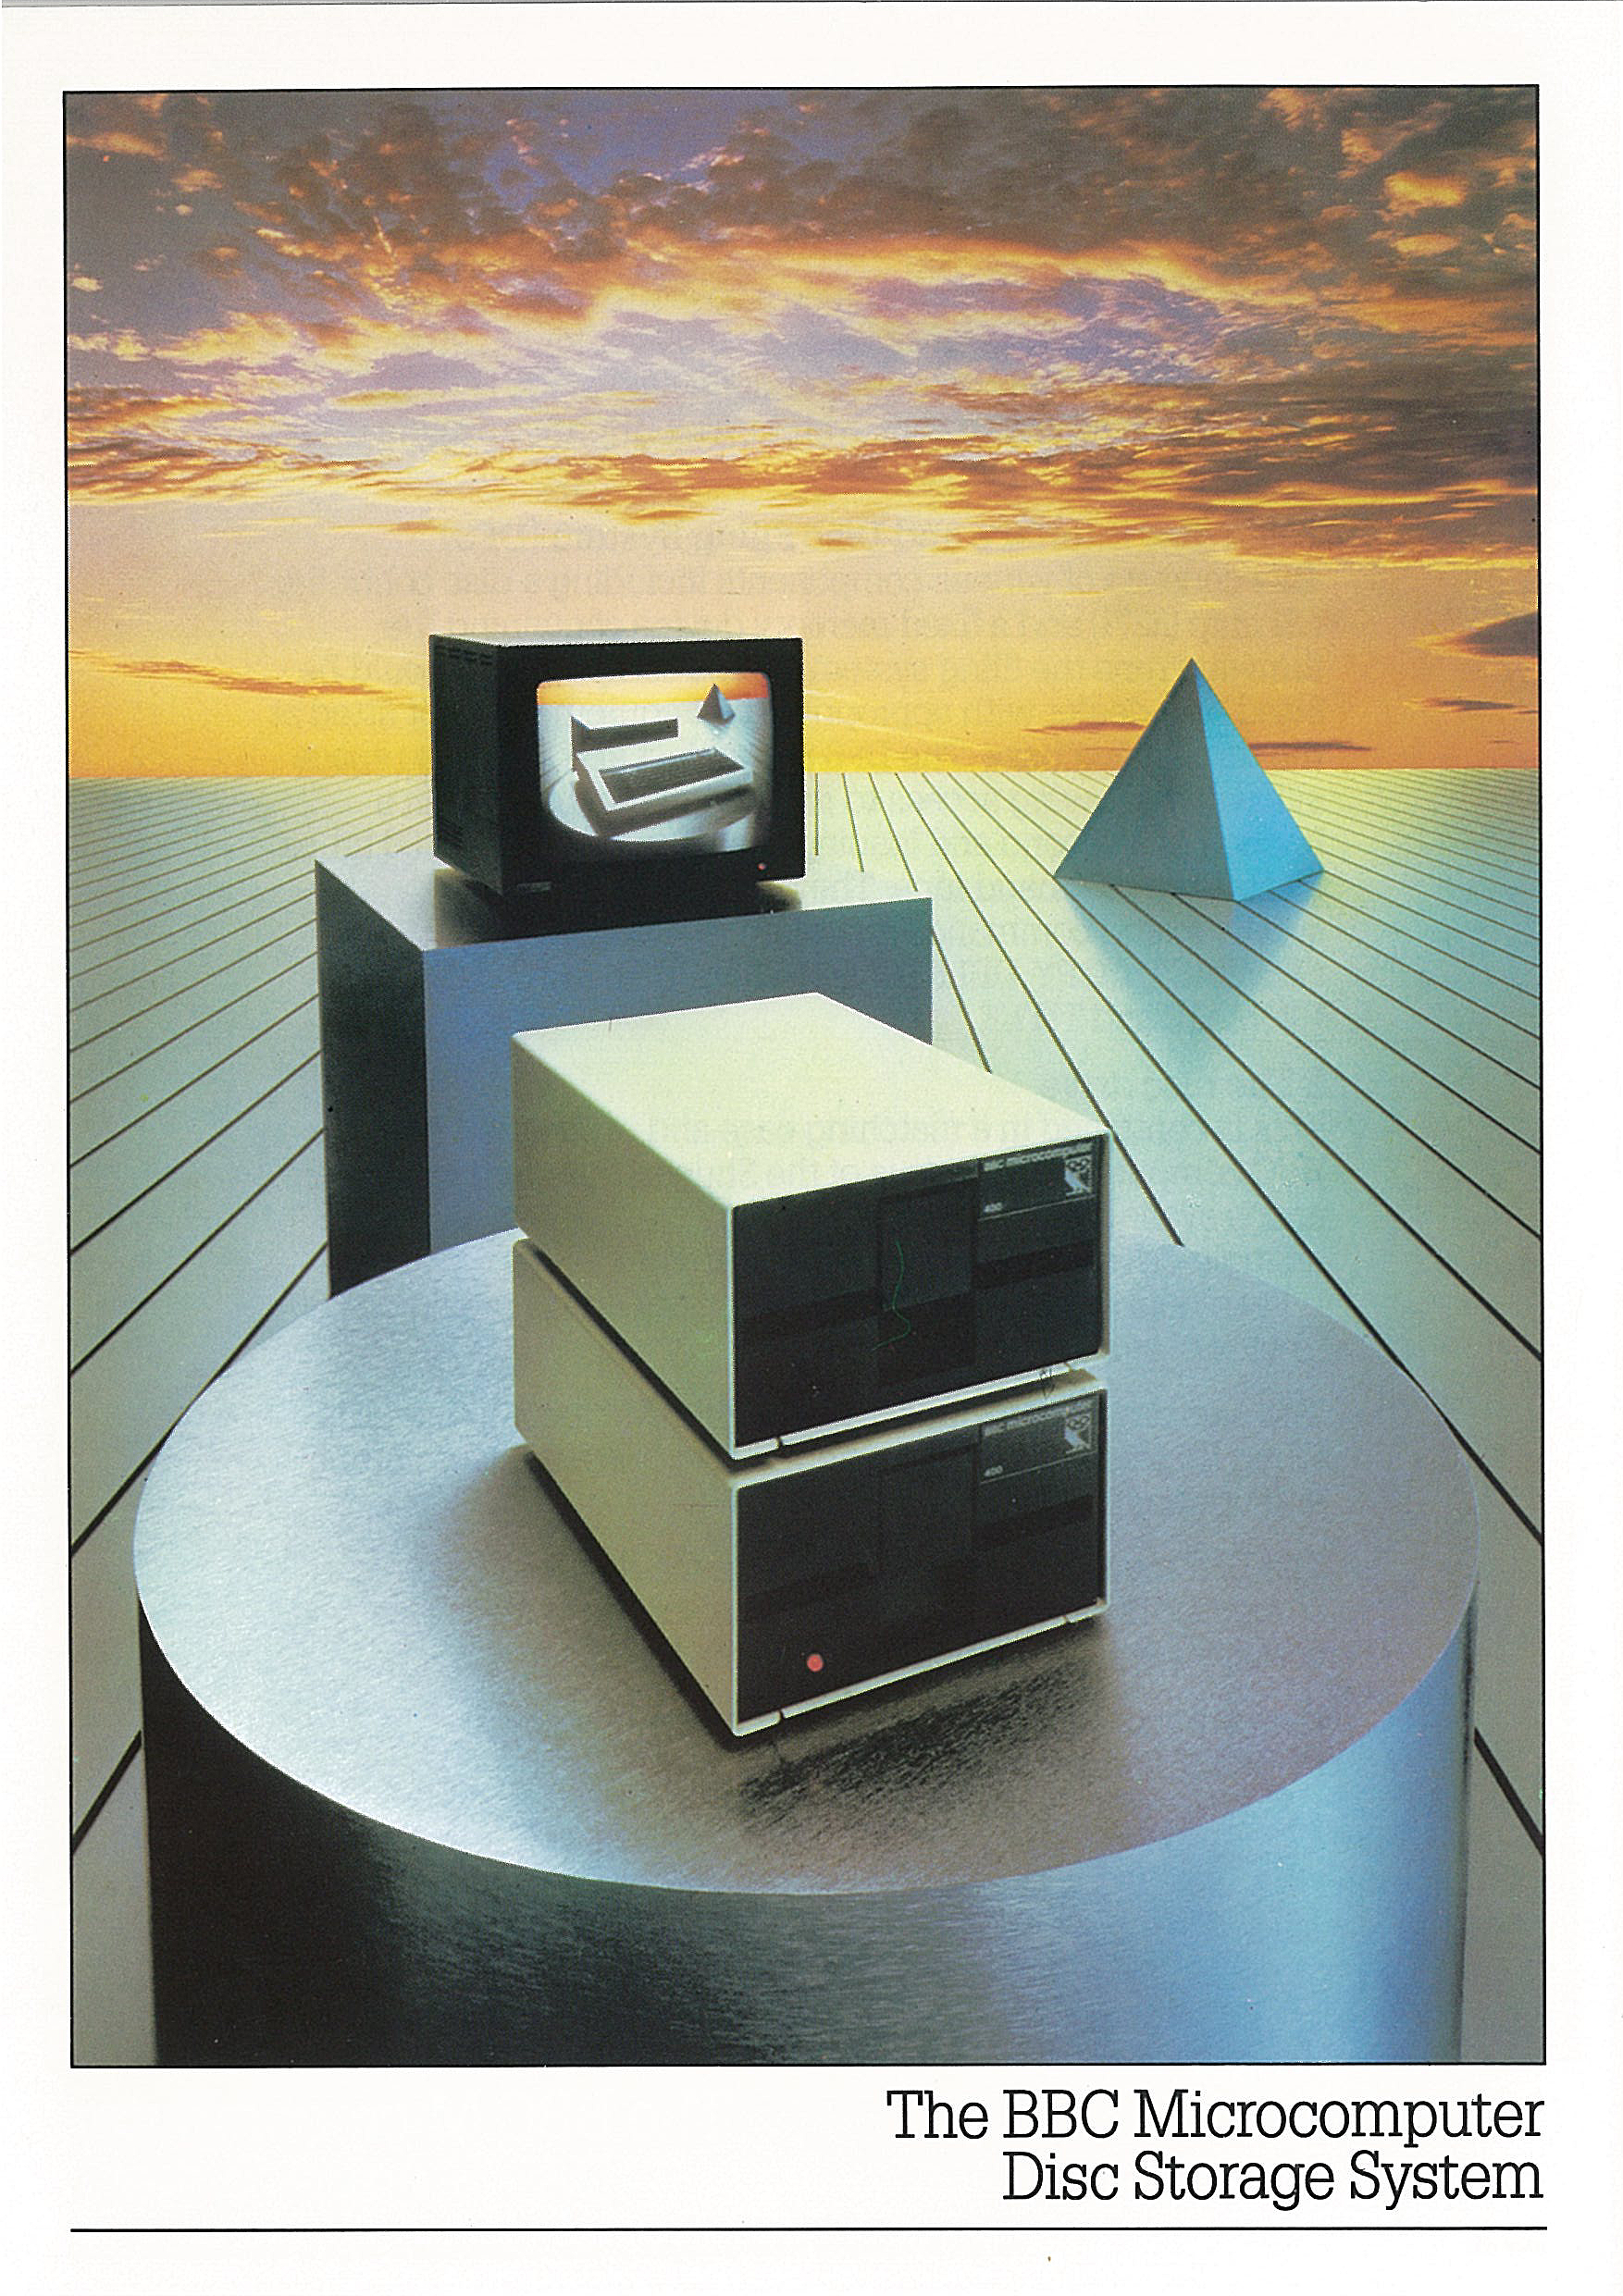 The BBC Microcomputer Disc Storage System